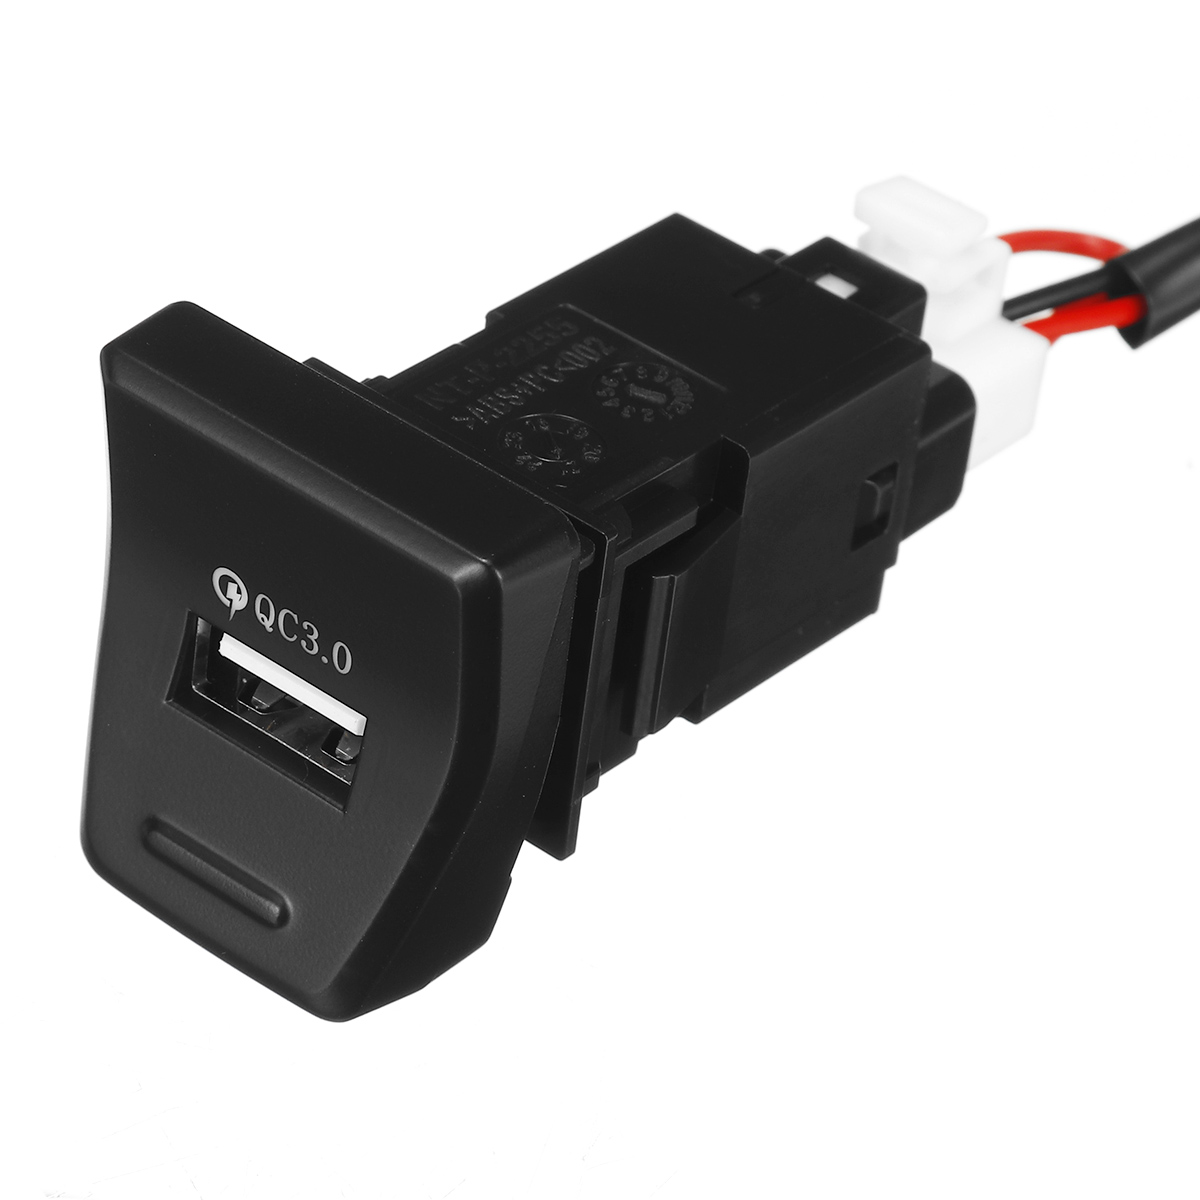 Bakeey-Central-Control-Position-QC30-Car-Charger-For-Toyota-RAV4-2019-2020-2021-Bouton-Backlight-5th-1885890-7